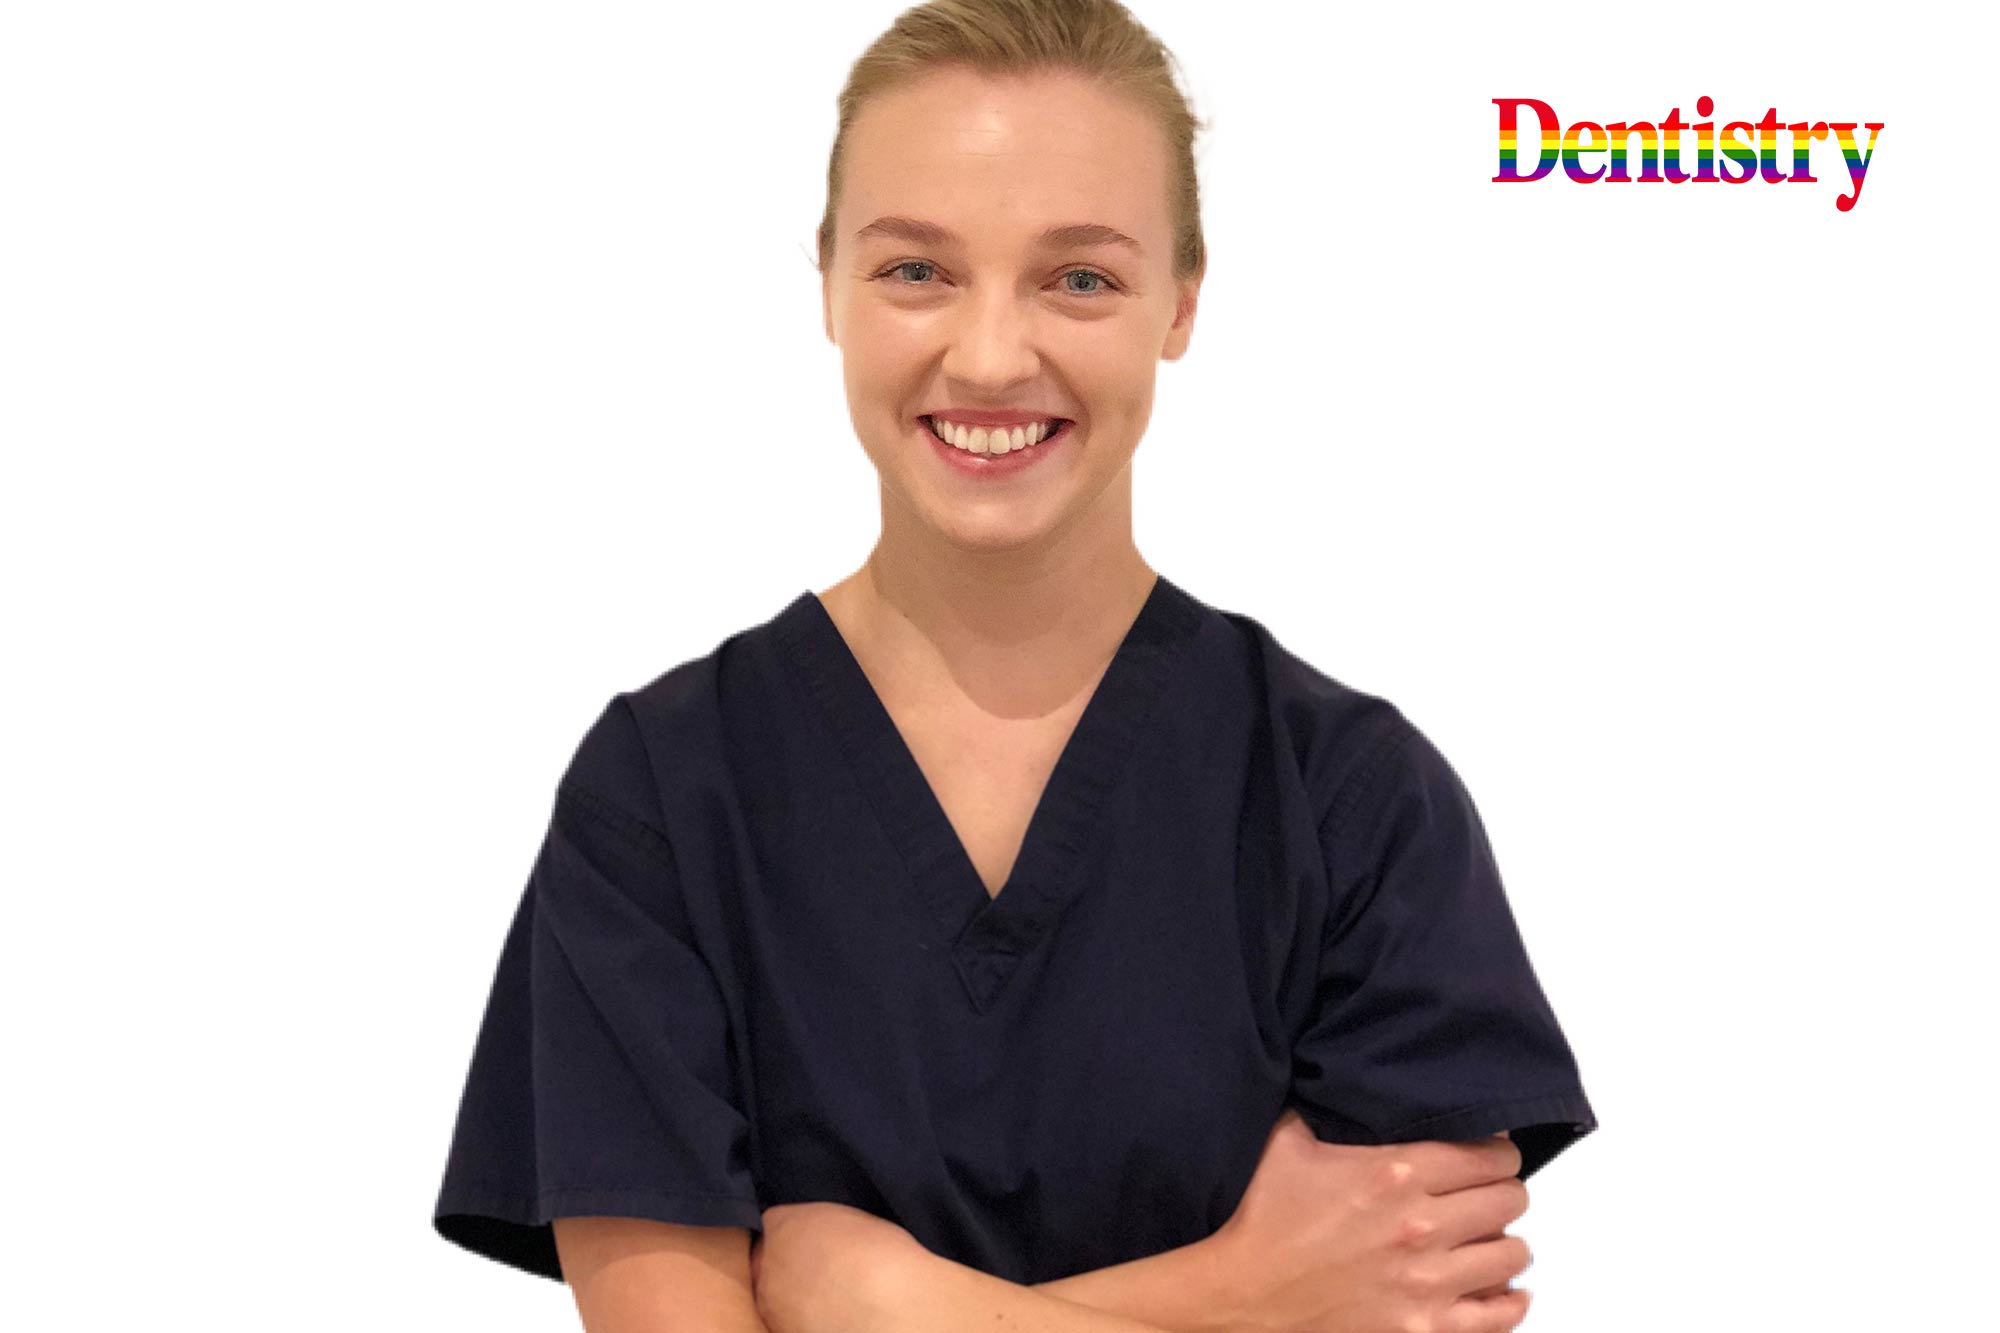 As we mark Pride Month this June, Anna Peterson opens up about her journey as a gay woman within dentistry and her mission to show people that you can be gay and be successful